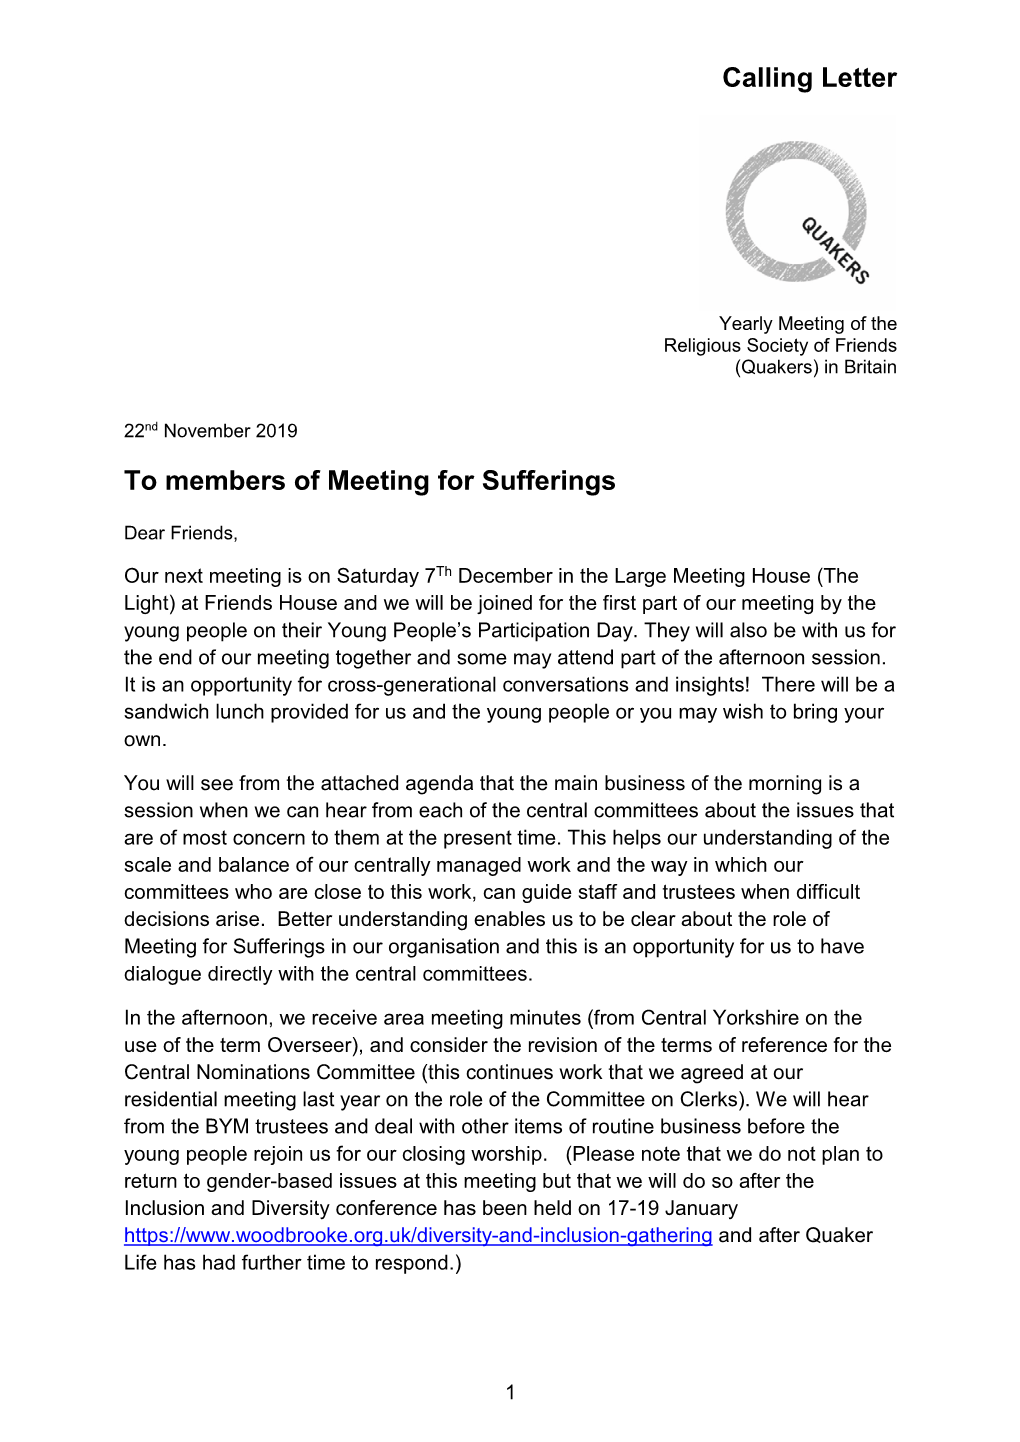 To Members of Meeting for Sufferings